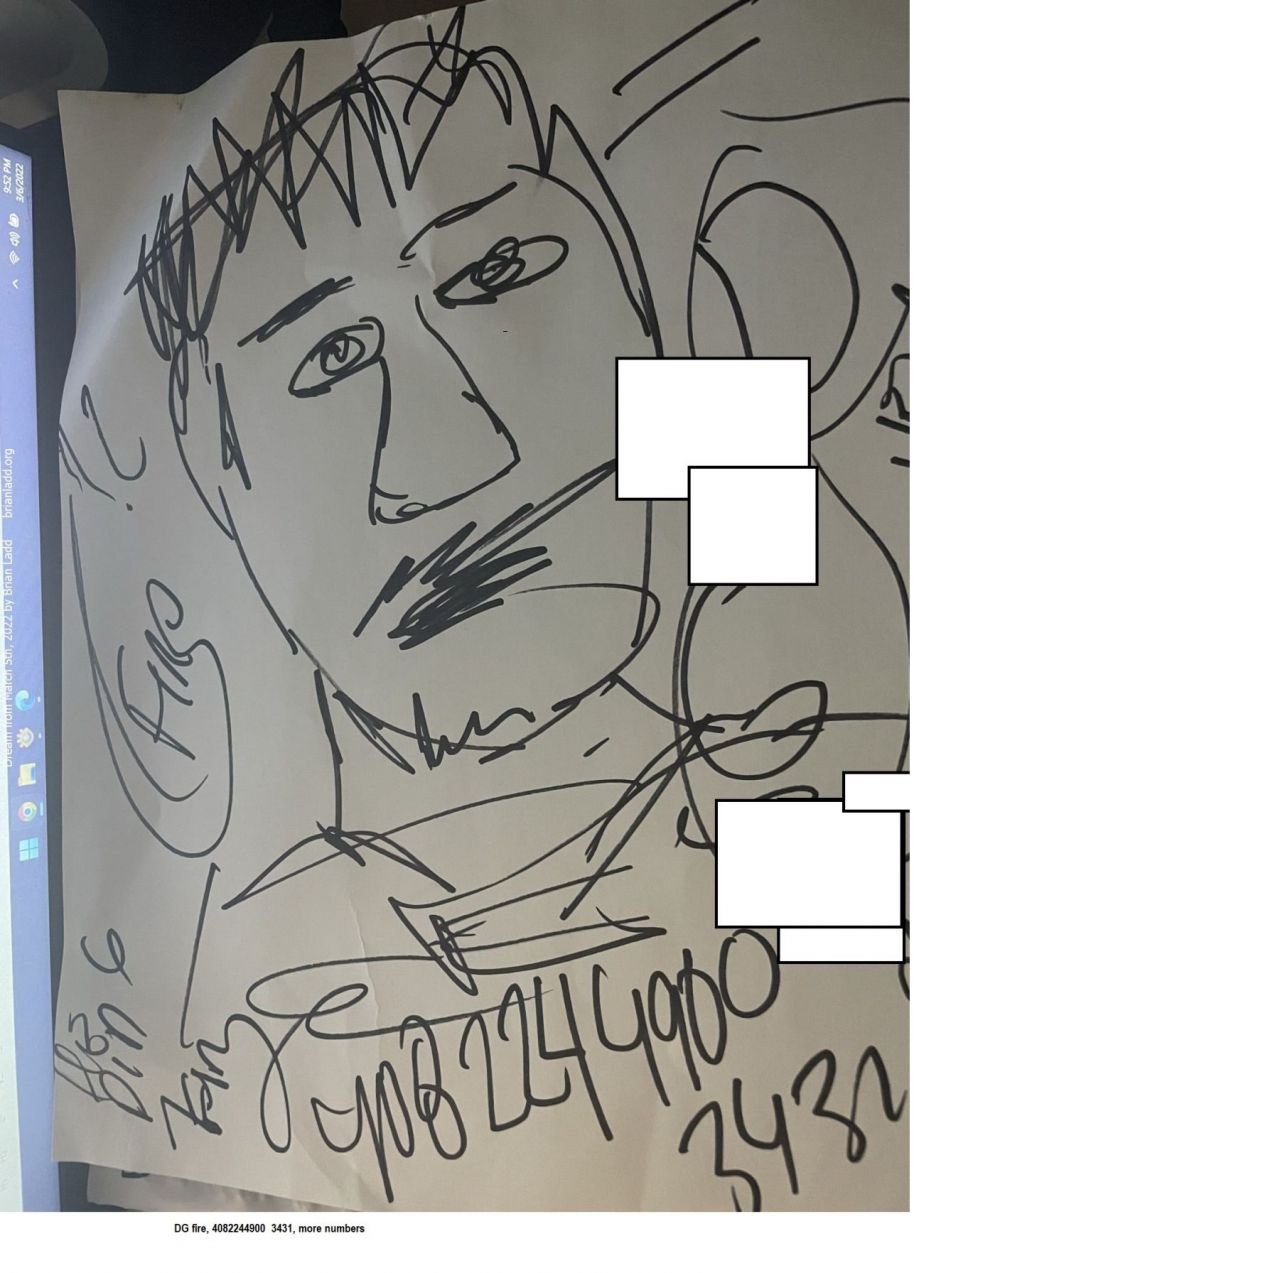 This dream from March 5th 2022 may be the man accused of setting a fire at a Home Depot on April 9th of the same year, to me, my drawing looks like the man but the rest of the dream does not seem to make any sense.   
This dream from March 5th 2022 may be the man accused of setting a fire at a Home Depot on April 9th of the same year, to me, my drawing looks like the man but the rest of the dream does not seem to make any sense.

original dream at:  https://briansprediction.com/displayimage.php?album=17735&pid=1299512#top_display_media


SAN JOSE, Calif. (KGO) -- In a Tuesday press conference, Santa Clara County District Attorney Jeff Rosen identified the suspect arrested for allegedly starting a massive 5-alarm fire at a San Jose Home Depot on April 9. The blaze destroyed the building and caused more than $17-million in damages and lost goods.


DA Rosen said using a warrant, SJPD arrested Dyllin Jaycruz Gogue, 27, of San Jose on Friday, April 15.

During his first court appearance on Tuesday, prosecutors pointed to theft as the real motive behind the blaze that burned down the Blossom Hill Road Home Depot.

"The evidence shows that the suspect- who had earlier that day stolen items from a nearby Bass Pro Shop- lit the fire in the Home Depot and tried to leave the store with a cart containing stolen tools," DA Rosen told reporters.


The Home Depot fire was also hectic for Wagly, a veterinary hospital and pet campus next door where dozens of animals had to be evacuated in a hurry.


Rosen said Gogue allegedly started a fire in an aisle, attempted to leave with a cartful of tools, and left in a vehicle.

As the crowded, 11-thousand-square-foot building burned, Rosen said Gogue then continued his attempted theft spree at an East Bay Macy's.

"Miraculously, no one was hurt in this five-alarm fire that was so hot and so large...far, far too close to causing many injuries and deaths," he said, causing an estimated $17 million in inventory loss.


"Within days, investigators with San Jose Police Department and ATF had a suspect using a warrant. San Jose PD arrested Gogue on Friday, April 15, less than two weeks after his horribly reckless and criminal behavior, left Home Depot a burned-out shell."

Gogue is charged with aggravated arson, seven counts of grand theft, and three counts of petty larceny, according to Rosen. These are charges which could land Gogue in prison for 14 years to life.

"It certainly is an arson in the sense that he apparently intentionally started a fire," legal analyst and former prosecutor Steven Clark told ABC7 News. "The question remains whether it's aggravated arson- that he intended to burn down the Home Depot or put lots of people in jeopardy. Or was he just intending to distract security?"

Industry experts explain the importance of having federal agents helping investigate the massive fire that destroyed a San Jose Home Depot.


Clark weighed in on the man's alleged behavior. Court documents show that between October 2021 to April 2022, Gogue was suspected of being involved in a number of thefts. Documents detailed he had stolen merchandise from various businesses with values ranging from $270 to more than $5,000.

"It appears that he's someone that has committed a number of thefts and has been doing it for a long time, but that doesn't necessarily make him an arsonist," Clark said. "And I think people are going to ask, why did this fire get started in this small way - to distract security apparently - but then turn into what we saw happen so quickly."


If you're on the ABC7 News app, click here to watch live

"It's difficult, without all of the information yet available- how exactly this fire was precisely lit and then how quickly it spread. And so, it is possible that there are enough combustibles in an area to overcome what the ratings of the fire protection systems are," San Jose Fire Chief Robert Sapien, Jr. told reporters.

He went on to say that it is possible to have a fire like this, even in a protected structure.

"We are still working to establish exactly what the status of the fire protection systems was in the building," the chief said.

Witnesses who spoke with ABC7 News claimed there was no immediate fire alarm and no sign of active sprinklers. The fire department said that is all under investigation.

"We were watching the ceiling come down in flames before any alarm came on," said Jeff Baham, who was inside during the fire. "It wasn't until maybe three minutes after we left, that this giant plume of smoke came rushing out to the front, and then we all knew it is time to leave."

Get ABC7’s top stories delivered to your inbox every morning
Sign up for our daily newsletter
By providing my email address, I agree to the Terms of Use and acknowledge that I have read the Privacy Policy.
Sign me up


"In this case, if in fact true, not having any suppression within the sprinkler systems... It's like, what happened? Was it overwhelmed? Was it not enough? Or was it shut off? I think those are the things that the fire department- now with ATF help- are gonna come out and present at some point," Park Fire District Chief Harold Schapelhouman shared.

He added, "You can overwhelm sprinkler systems- and we've seen that before in large warehouse facilities- meaning that the fire gets so big, the ability of the sprinkler system is not there to be able to put it out. So that's a design issue, that's a combustible load issue, that's a code issue. And those are all real factors."

When that time comes, he said what is ultimately identified could lead to widespread improvements.

"It's not as if that's the only Home Depot in the country, right?" he added. "Nobody's looking to duplicate this."

Gogue appeared in court Tuesday afternoon and was assigned a public defender. His next court date is June 1 at 1:30 p.m.

ABC7 News reached out to Home Depot after Tuesday's development. The company issued a statement that read, "We owe a lot of thanks to the first responders, San Jose fire, police and partner organizations for their fast response and investigation that led to this arrest. Above all, we're thankful no one was harmed, and that all of our associates and customers are safe
